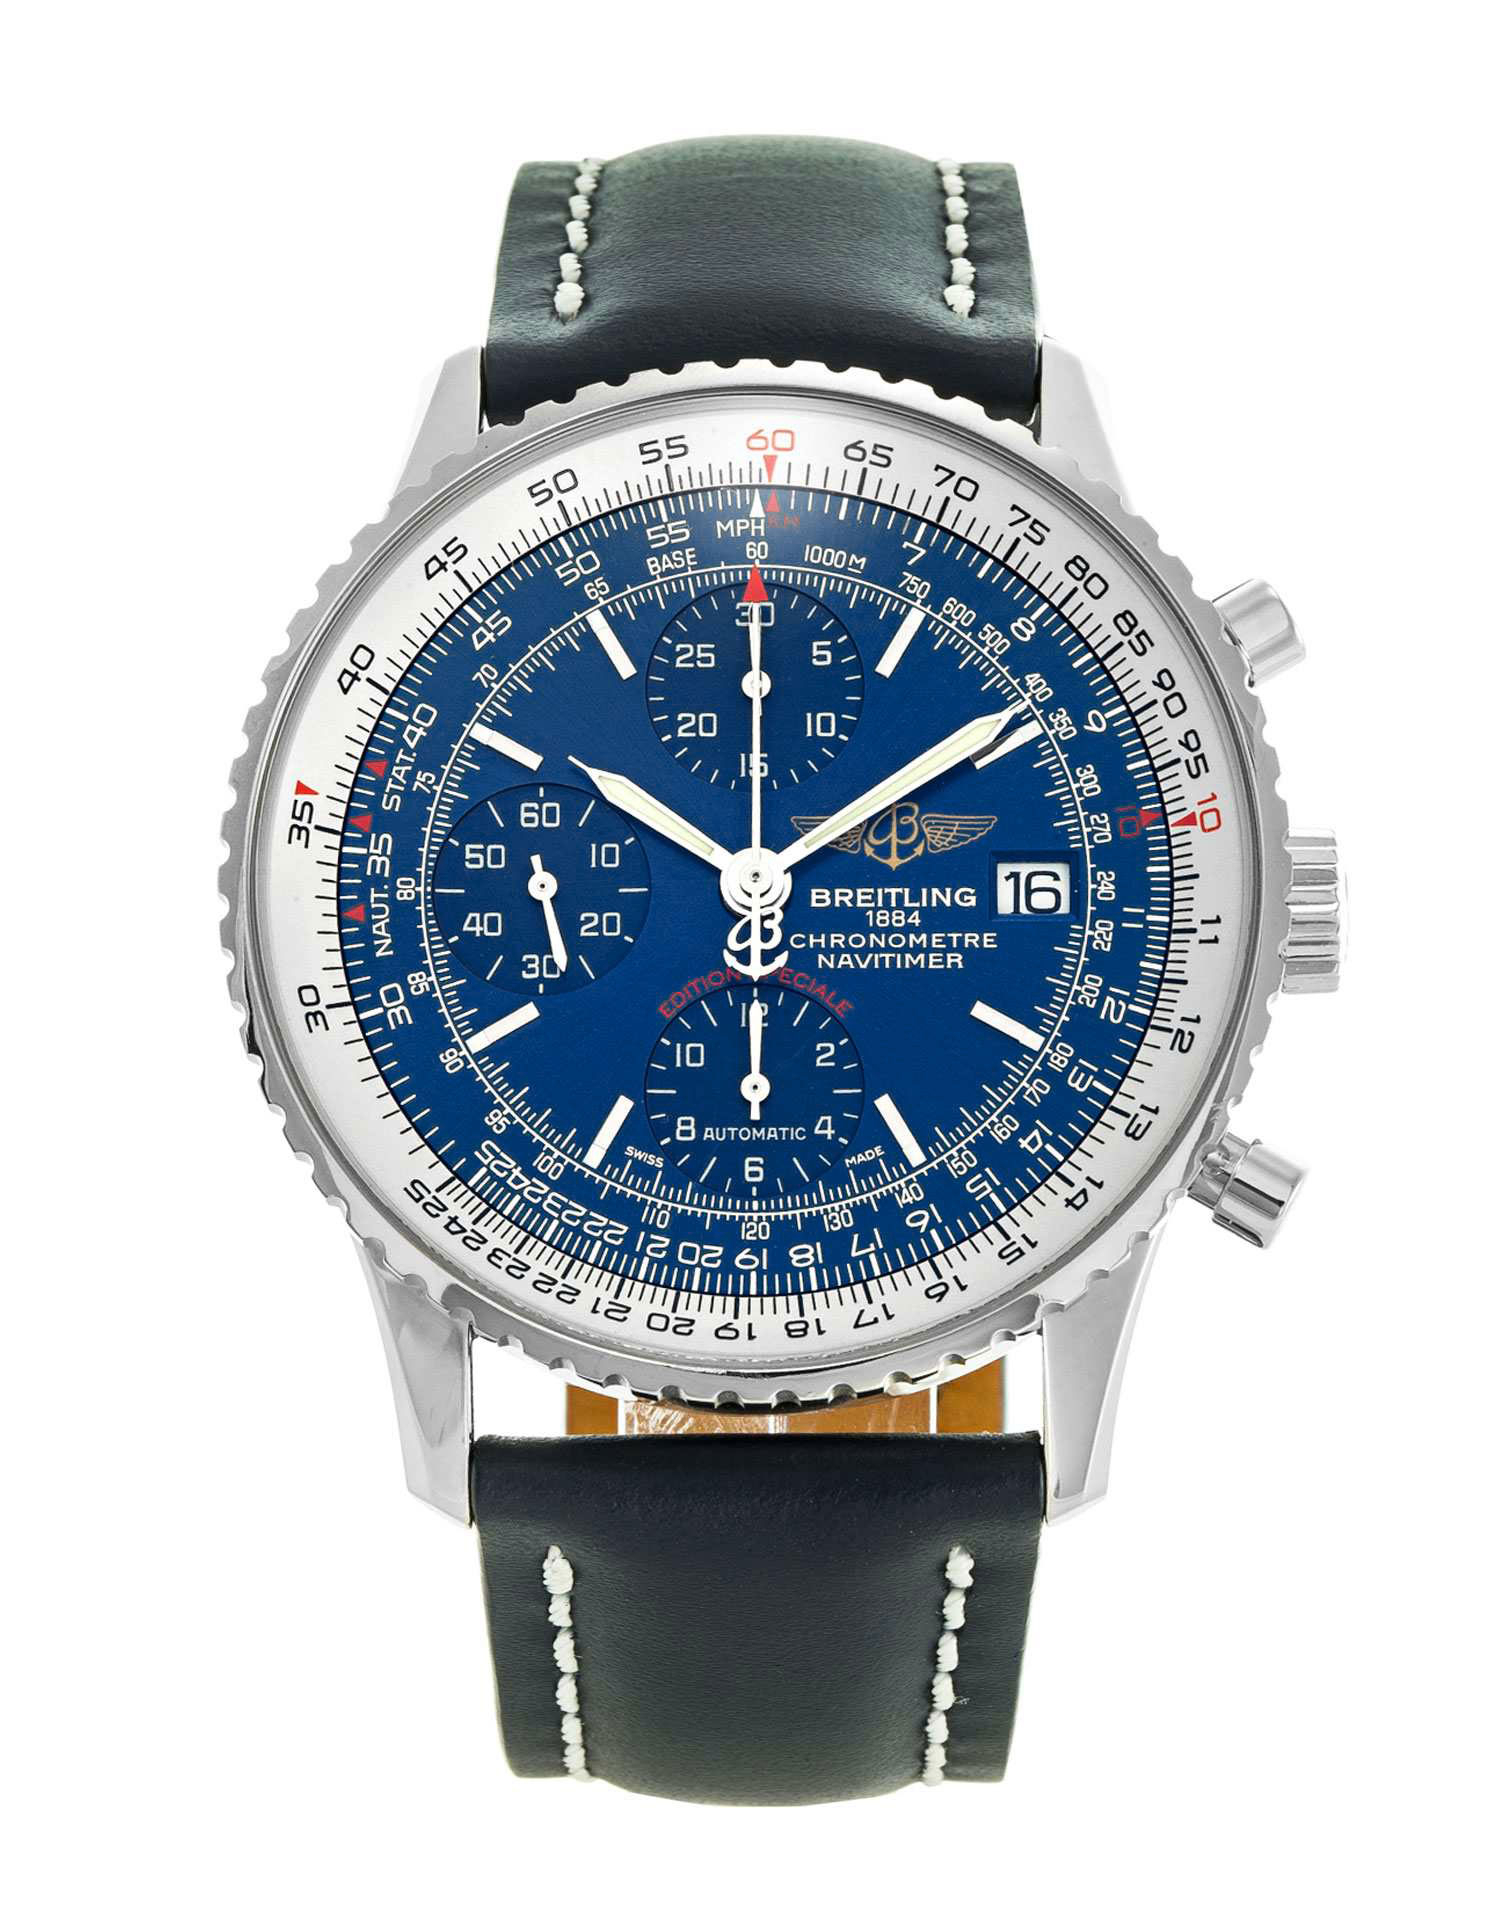 Breitling Navitimer Heritage A13324 Watch | Watchfinder &amp;amp; Co. tout Breitling Navitimer Heritage